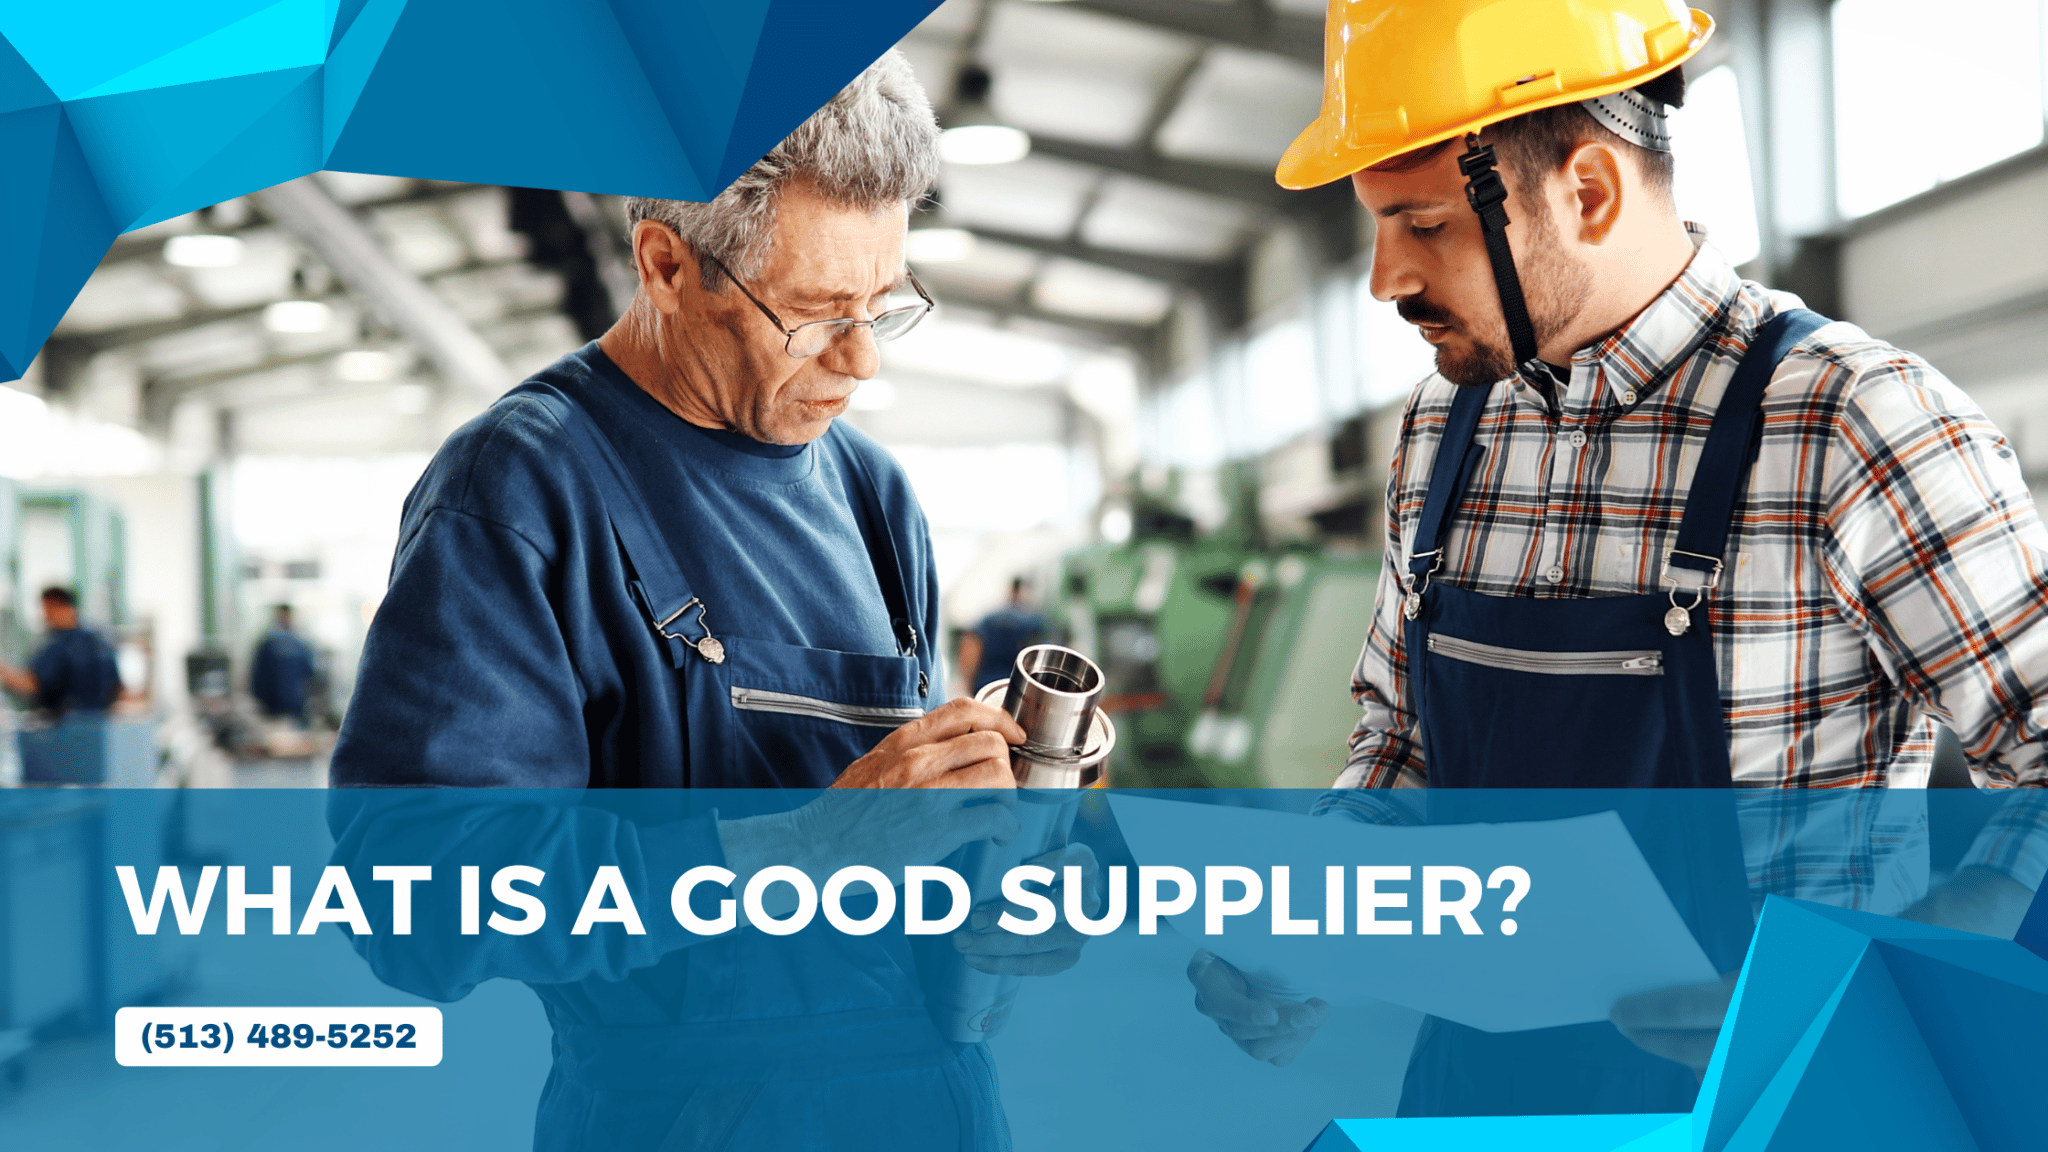 What is a Good Supplier?